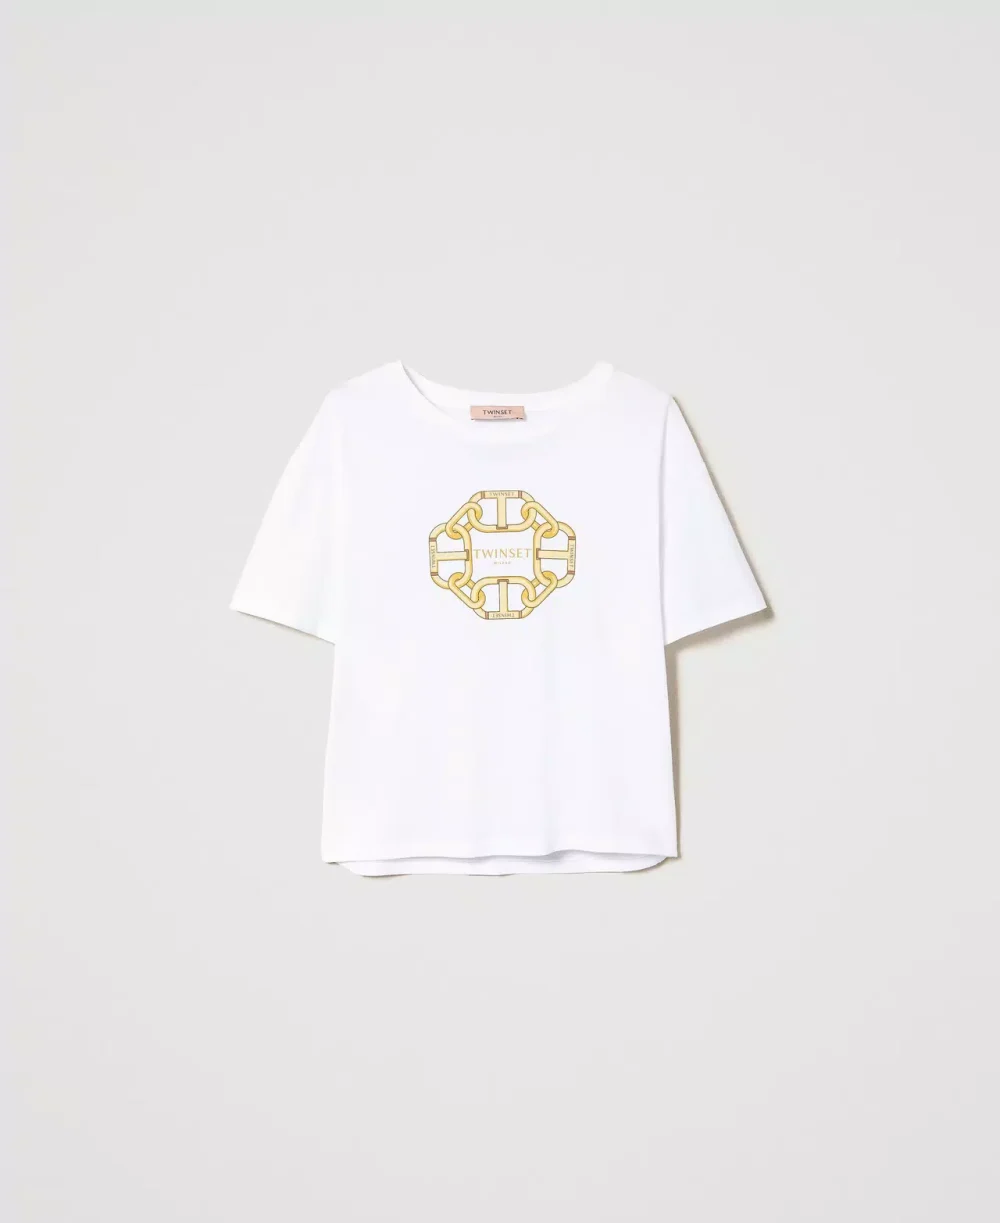 Twinset T-shirt with chain print and Oval T